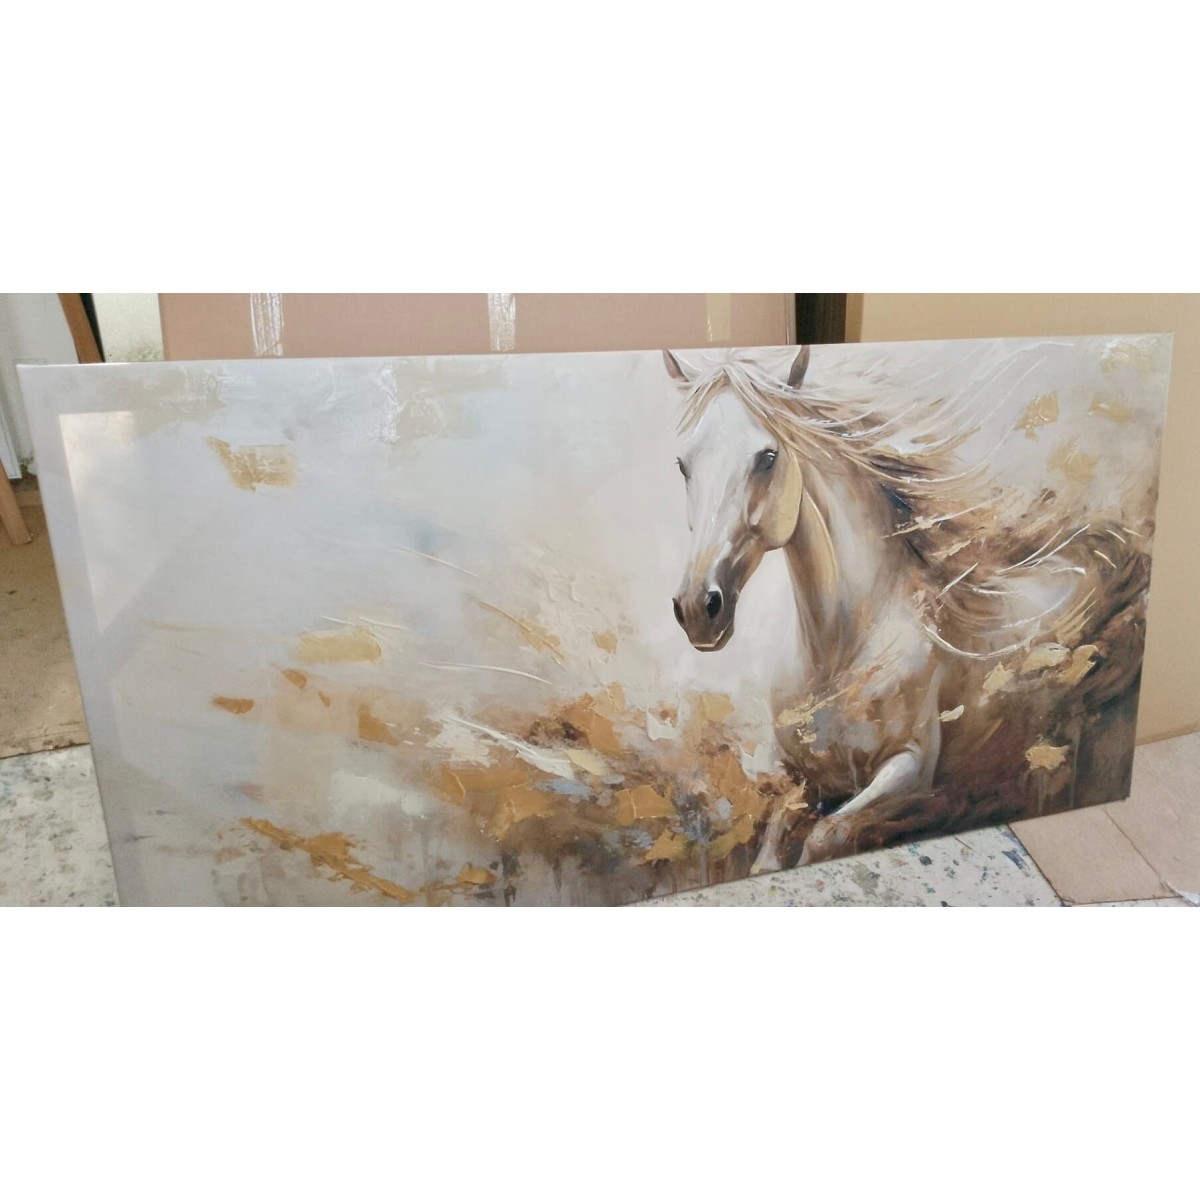 White Horse Textured Partial Oil Painting